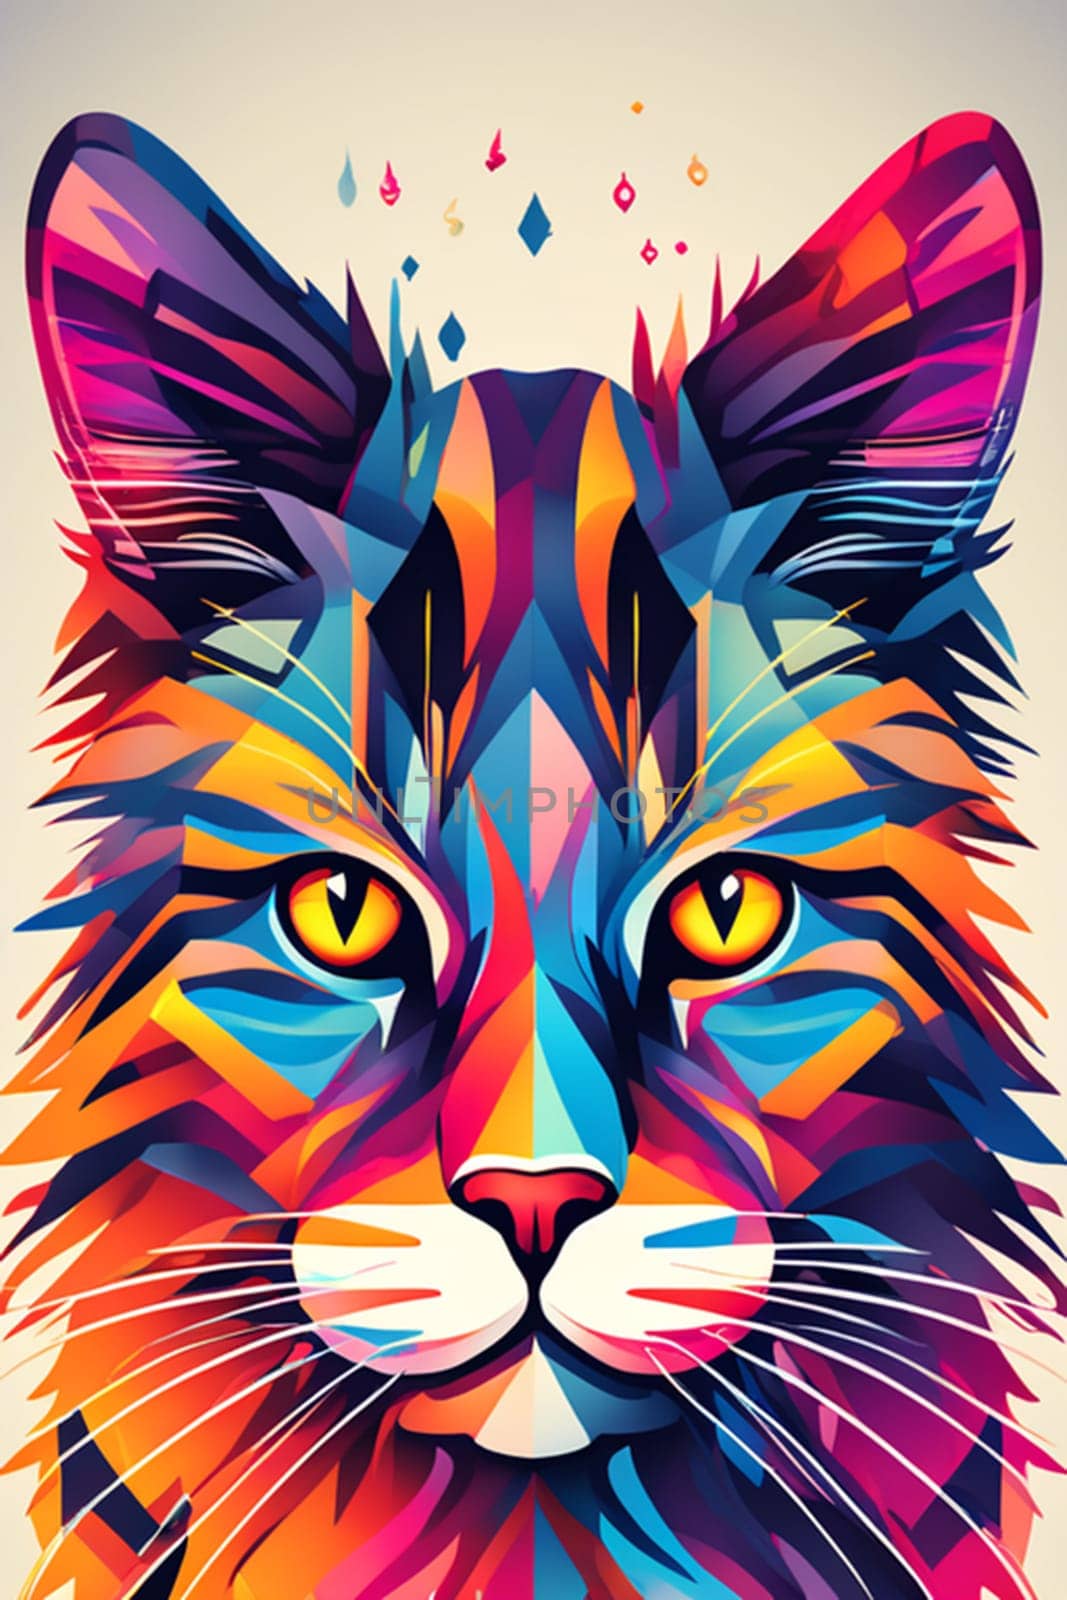 Cat head in pop art style. Minimalist style (neon line logo) depicting a mosaic geometric cat surrounded by vibrant smoke effects on a white background by Ekaterina34